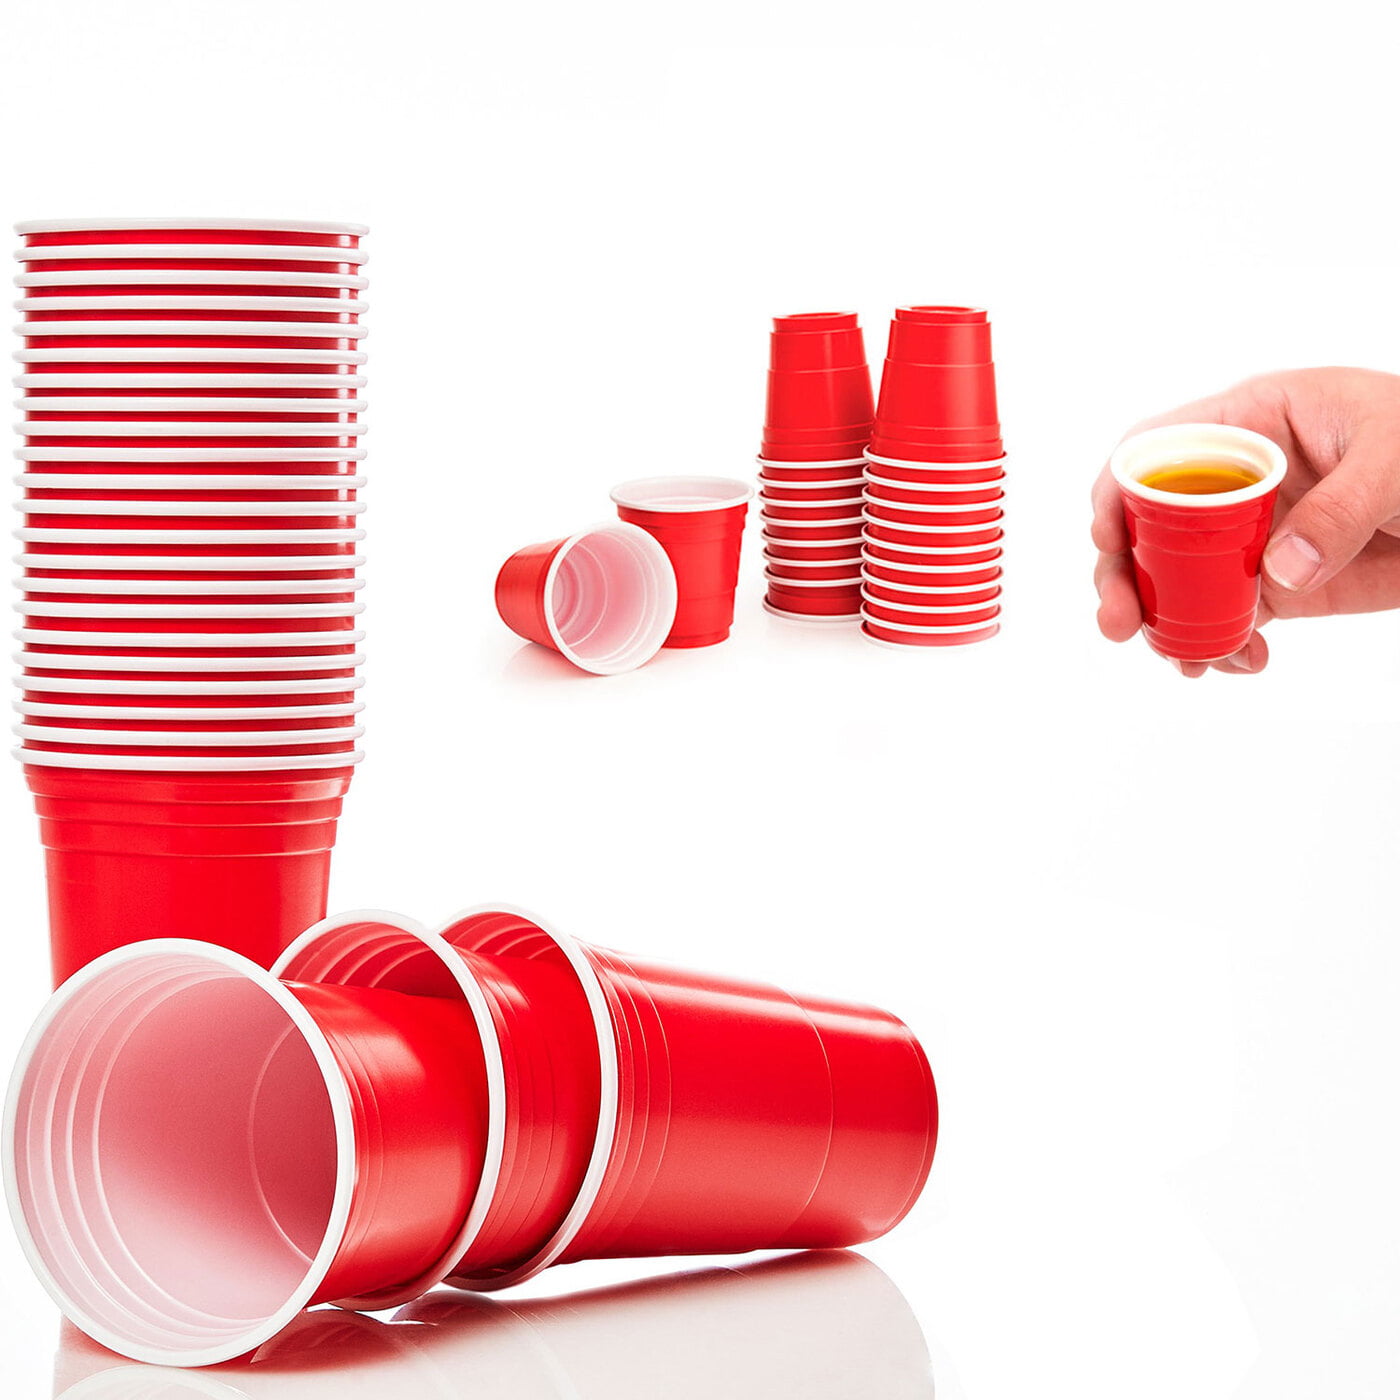 Beer Pong and shot Glasses